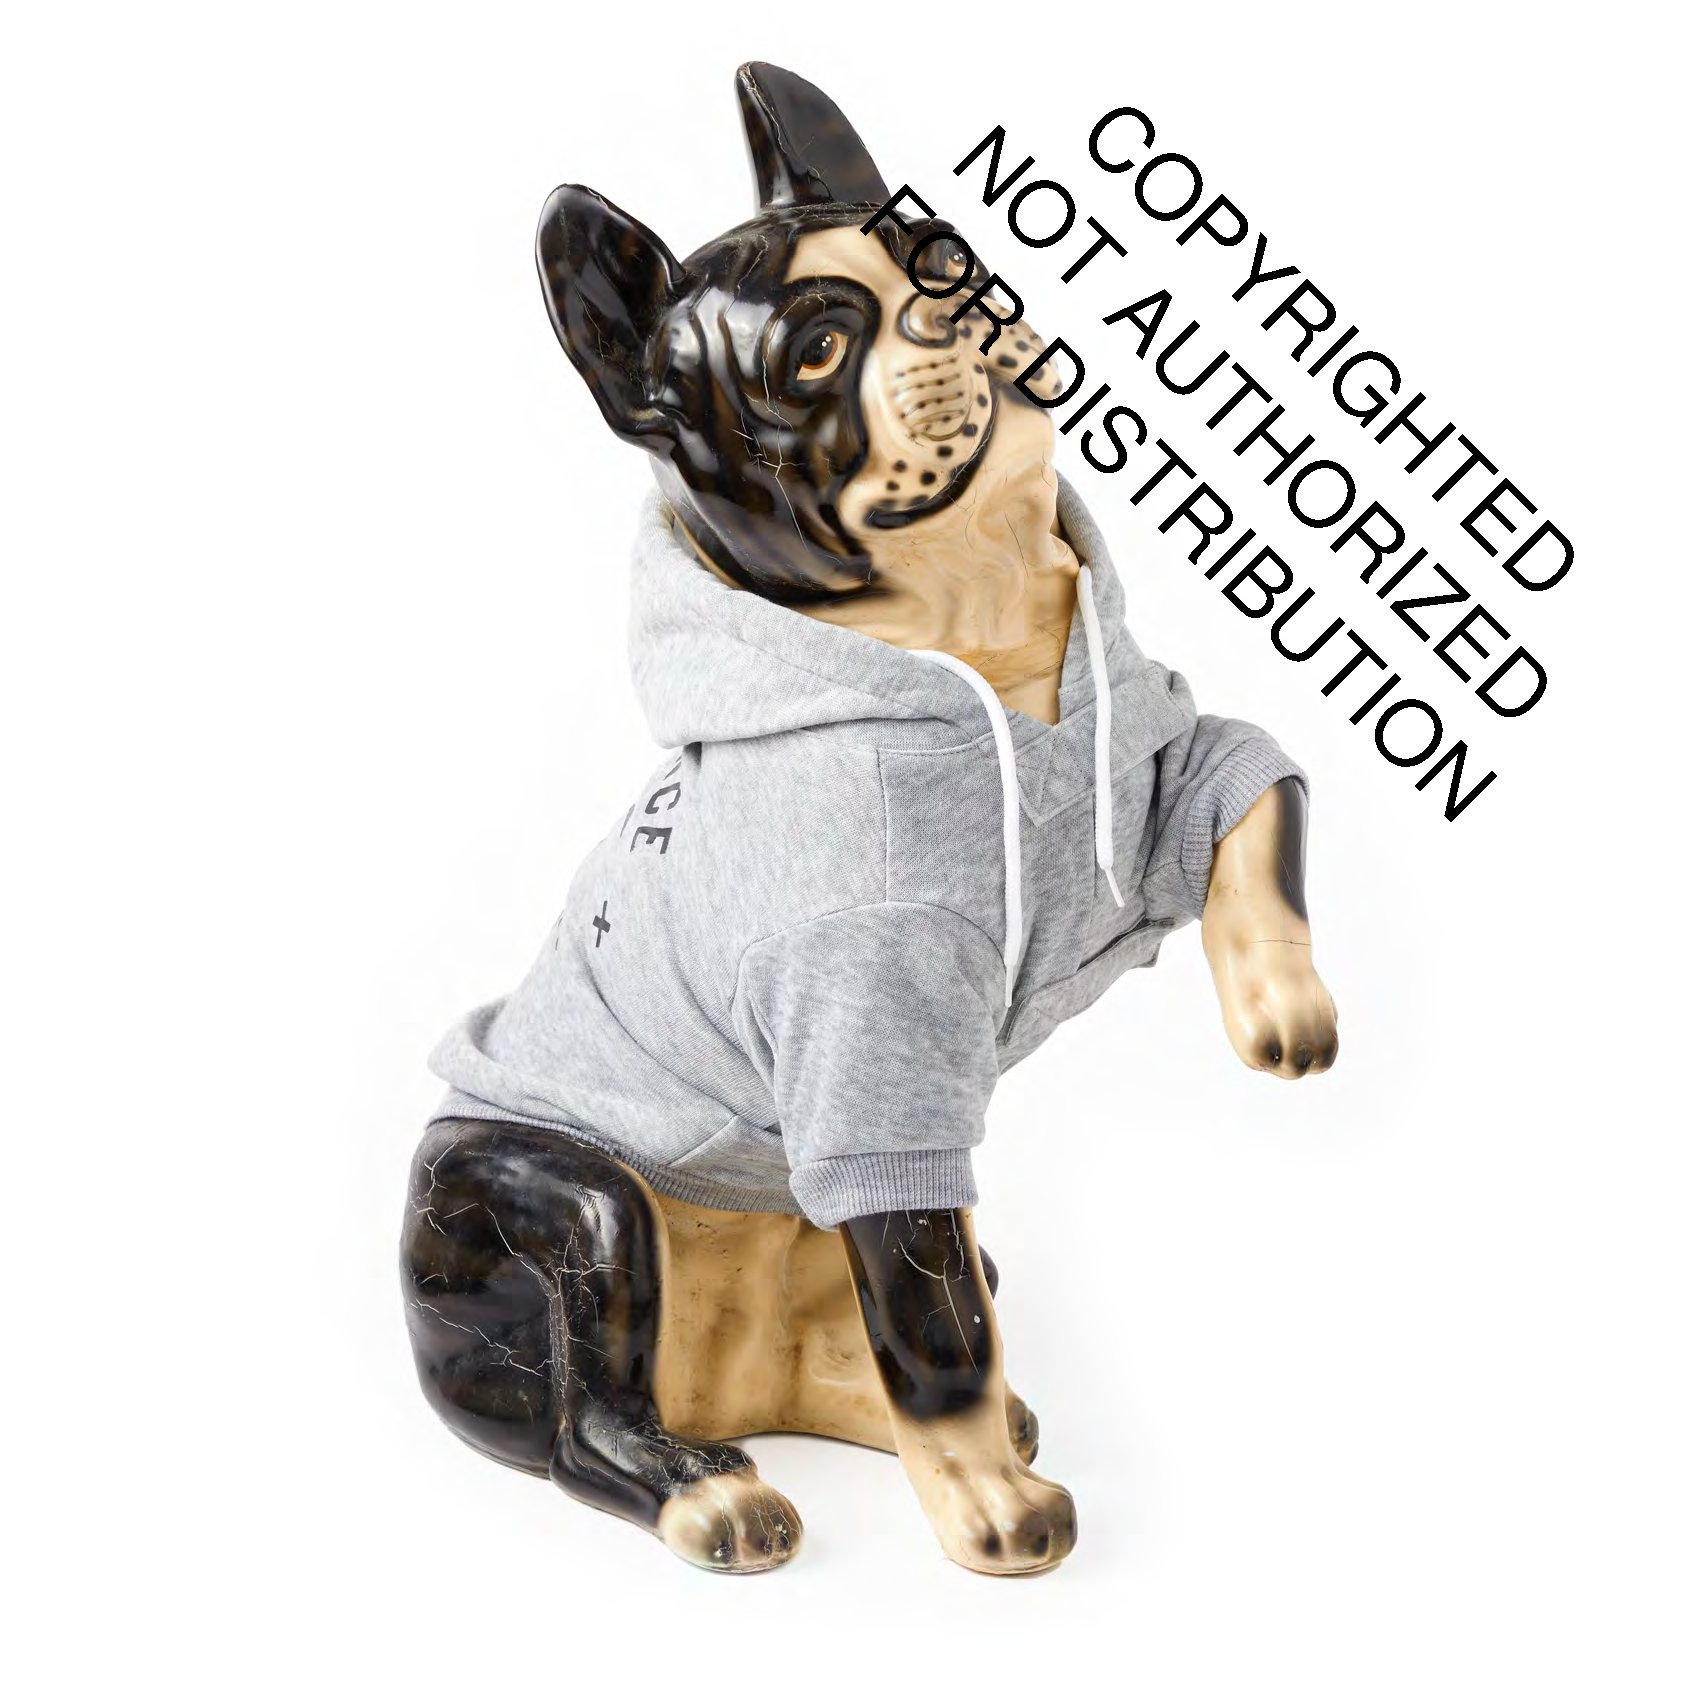 Obedience School Dropout Dog Hoodie - S